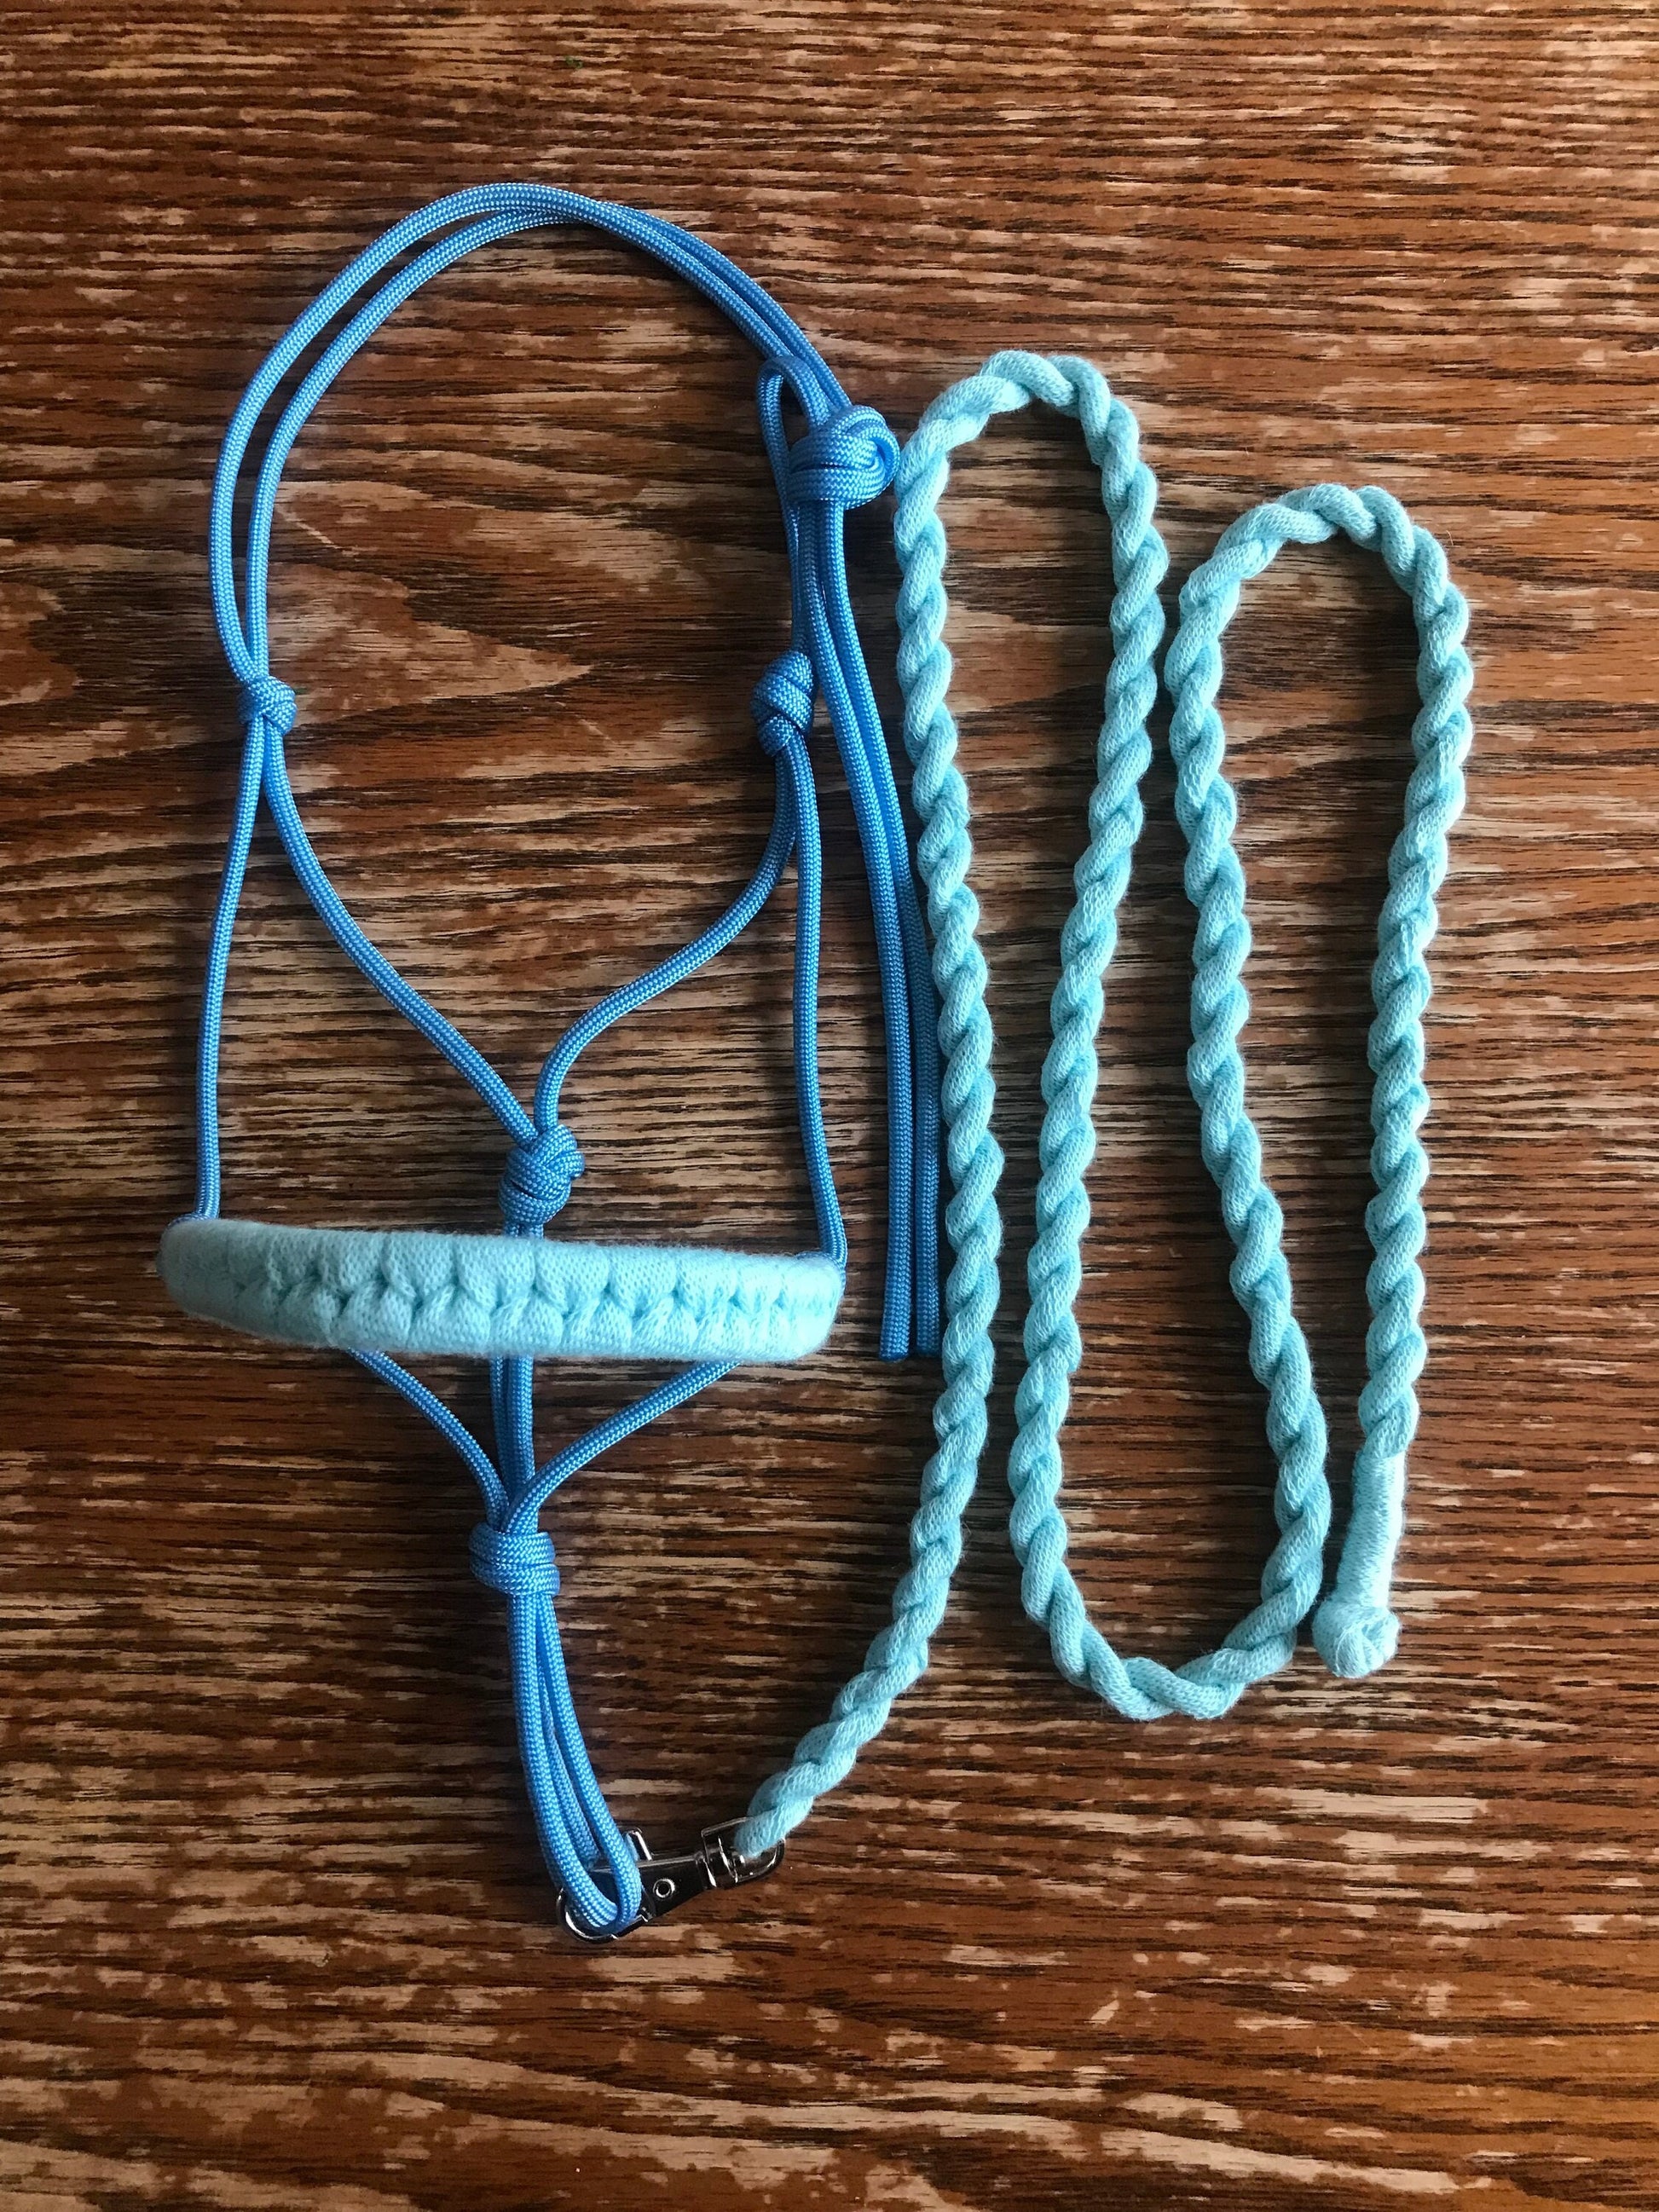 Hobby horse rope halter and lead rope light blue and turquoise